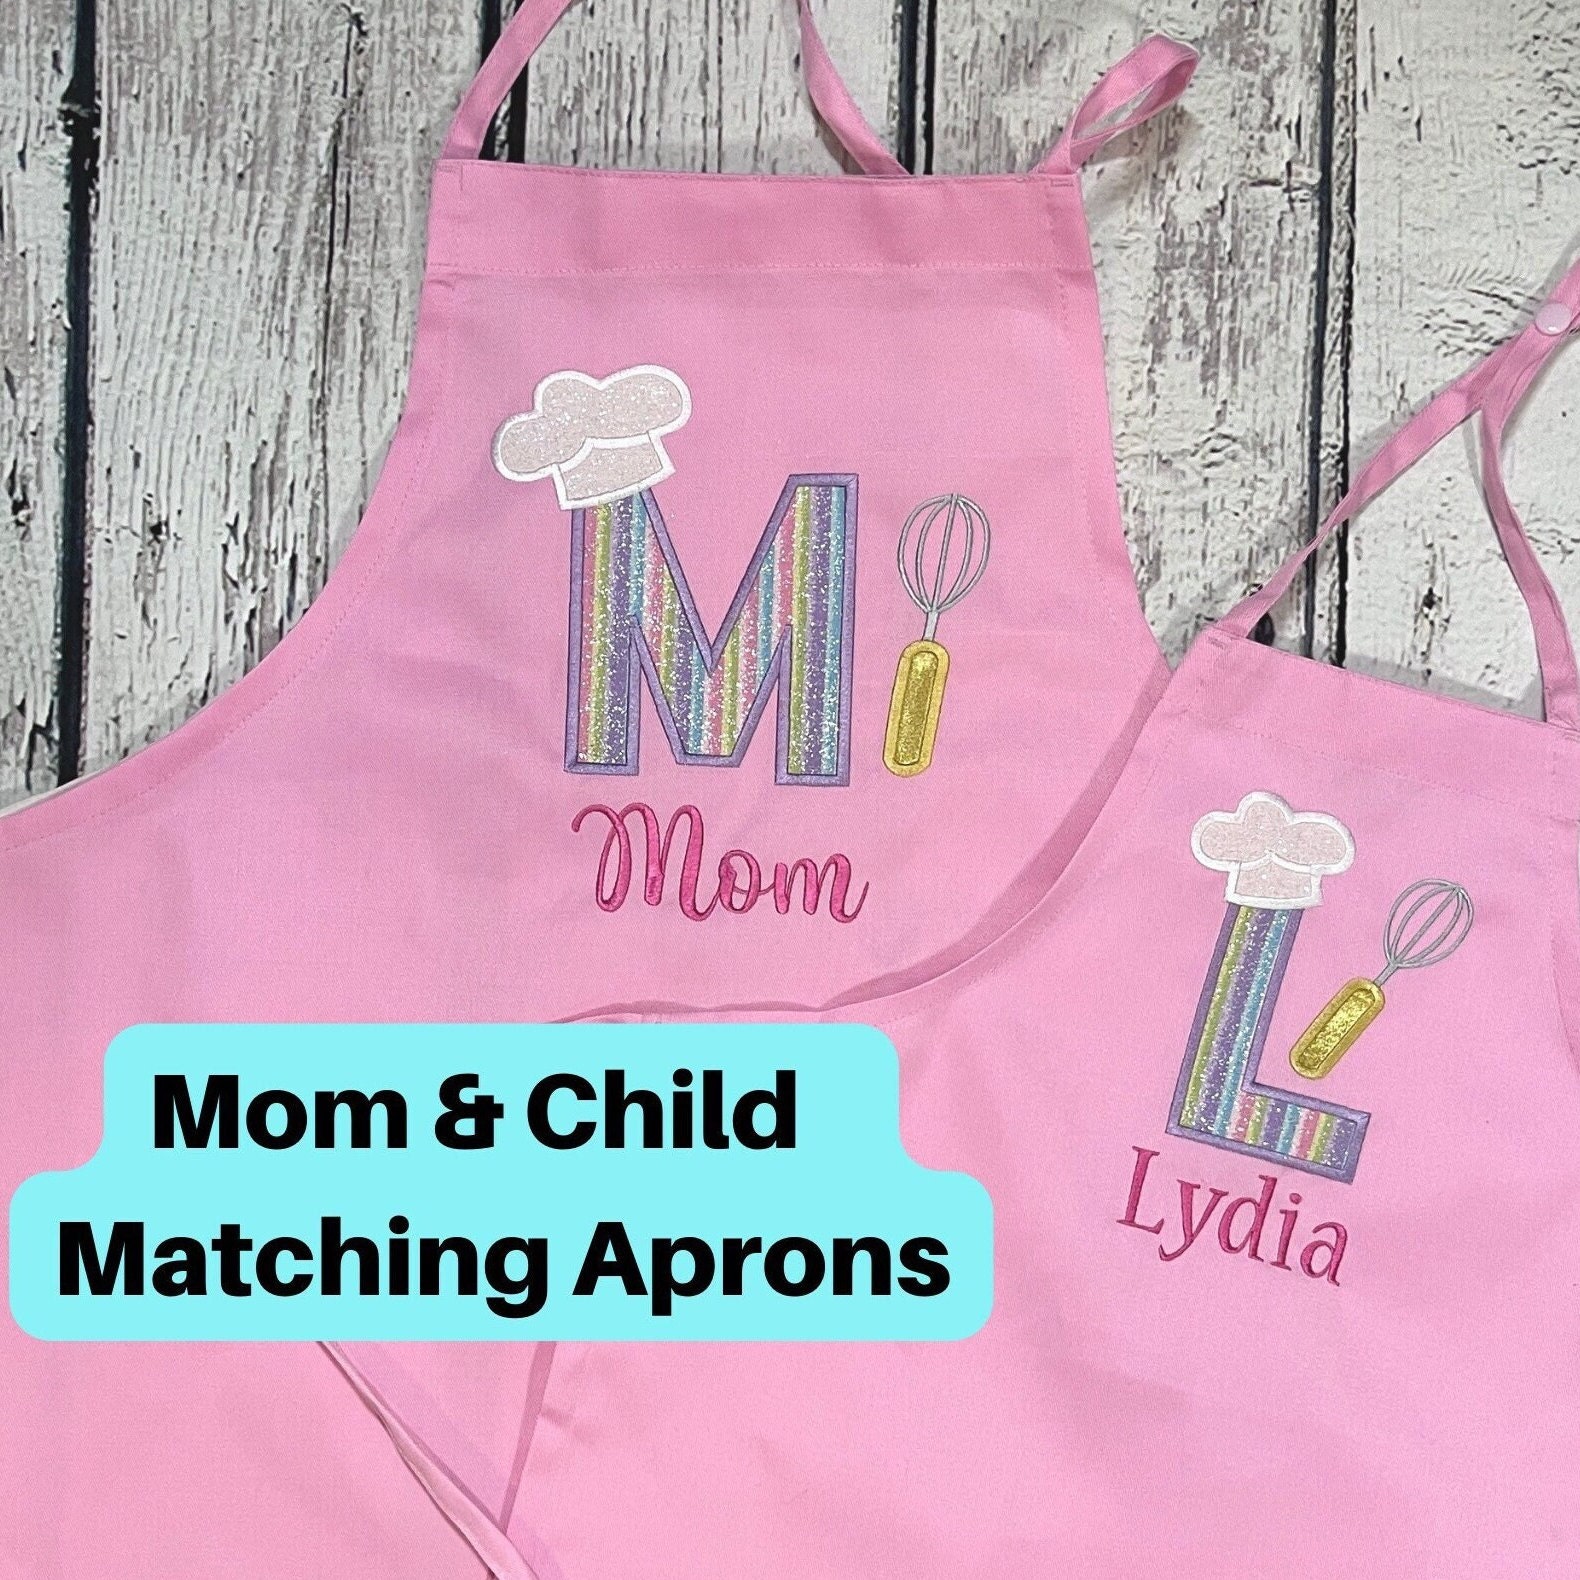 Personalized Embroidered Mother Daughter or Mother Child Matching Apron  Set, Personalized Matching Aprons W Pockets for Mom & Girl 